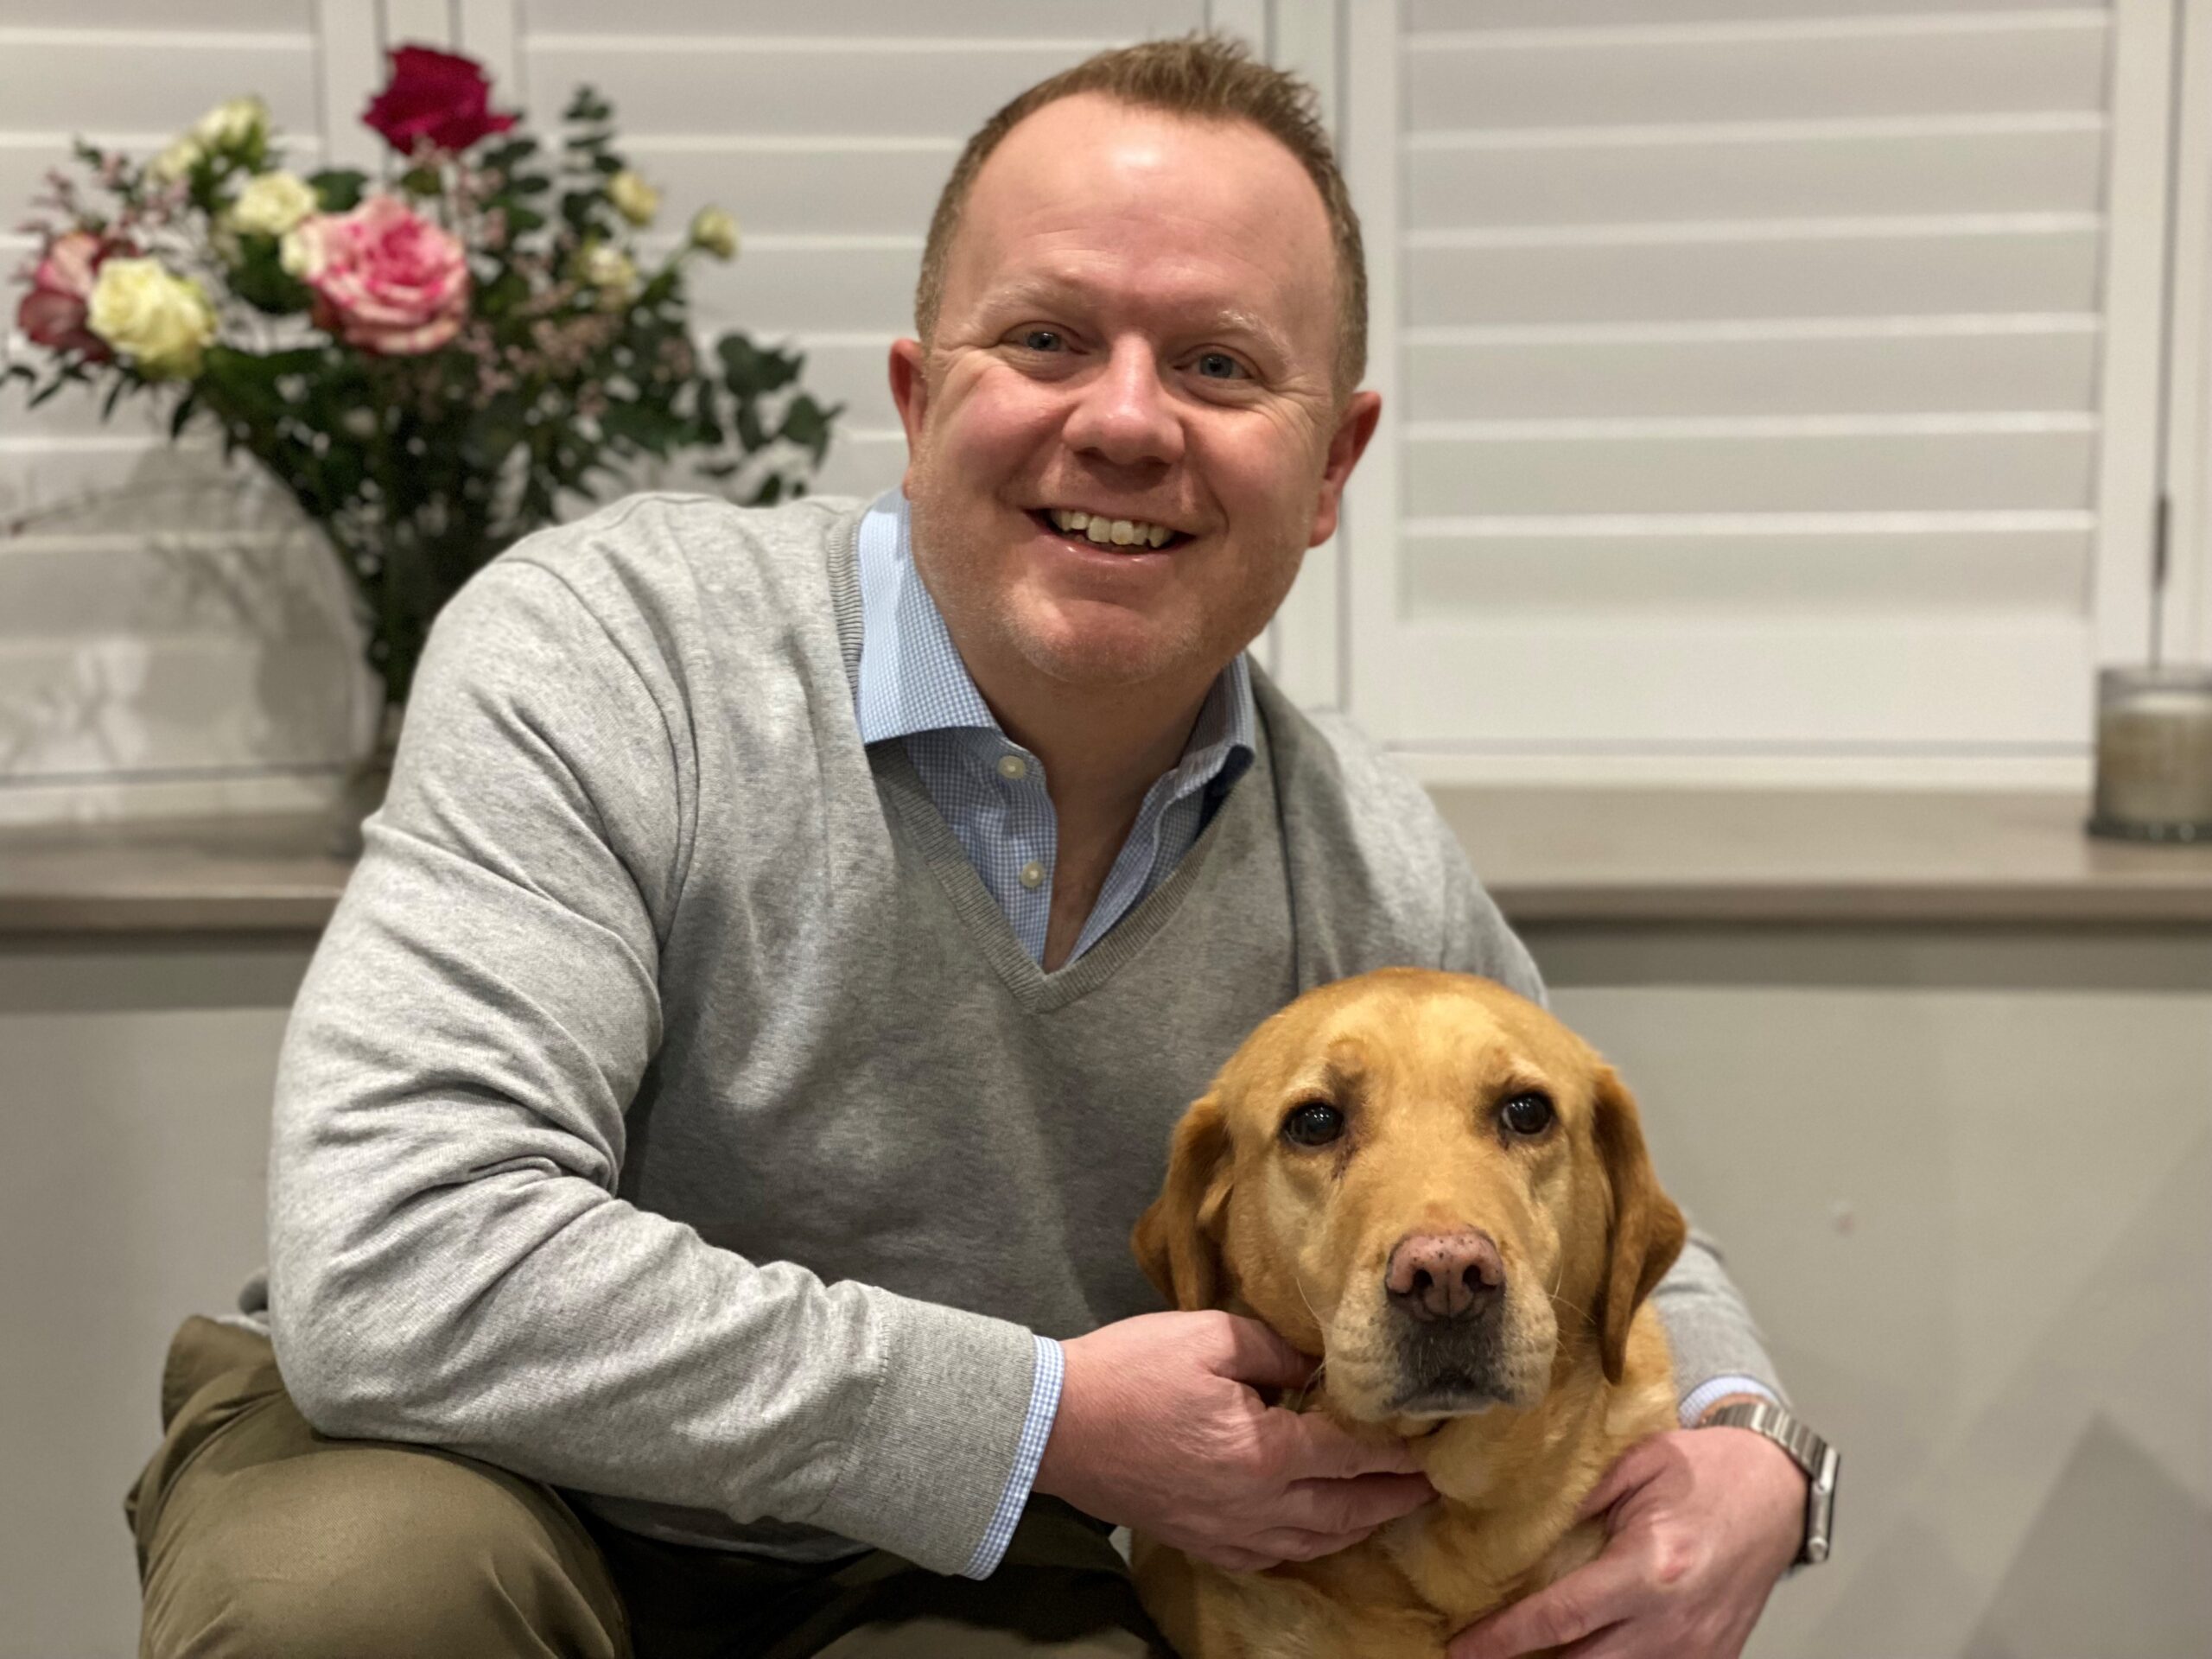 An imagine of Chris Shales, Clinial Director at Willows, sitting with a golden labrador and smiling